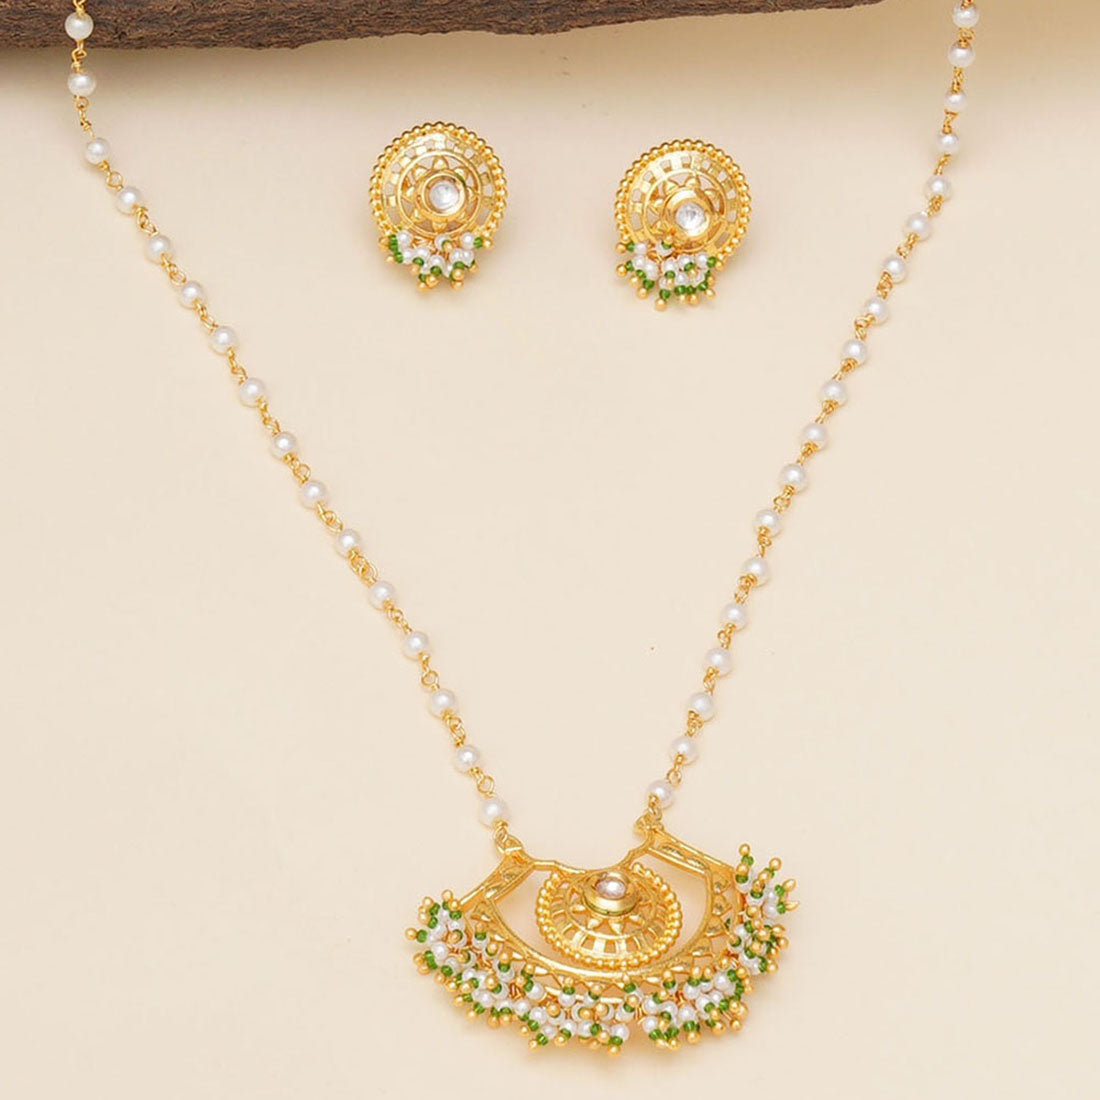 Women's Festive Hues Long Jewellery Set In Gold And Pearl Chain - Voylla